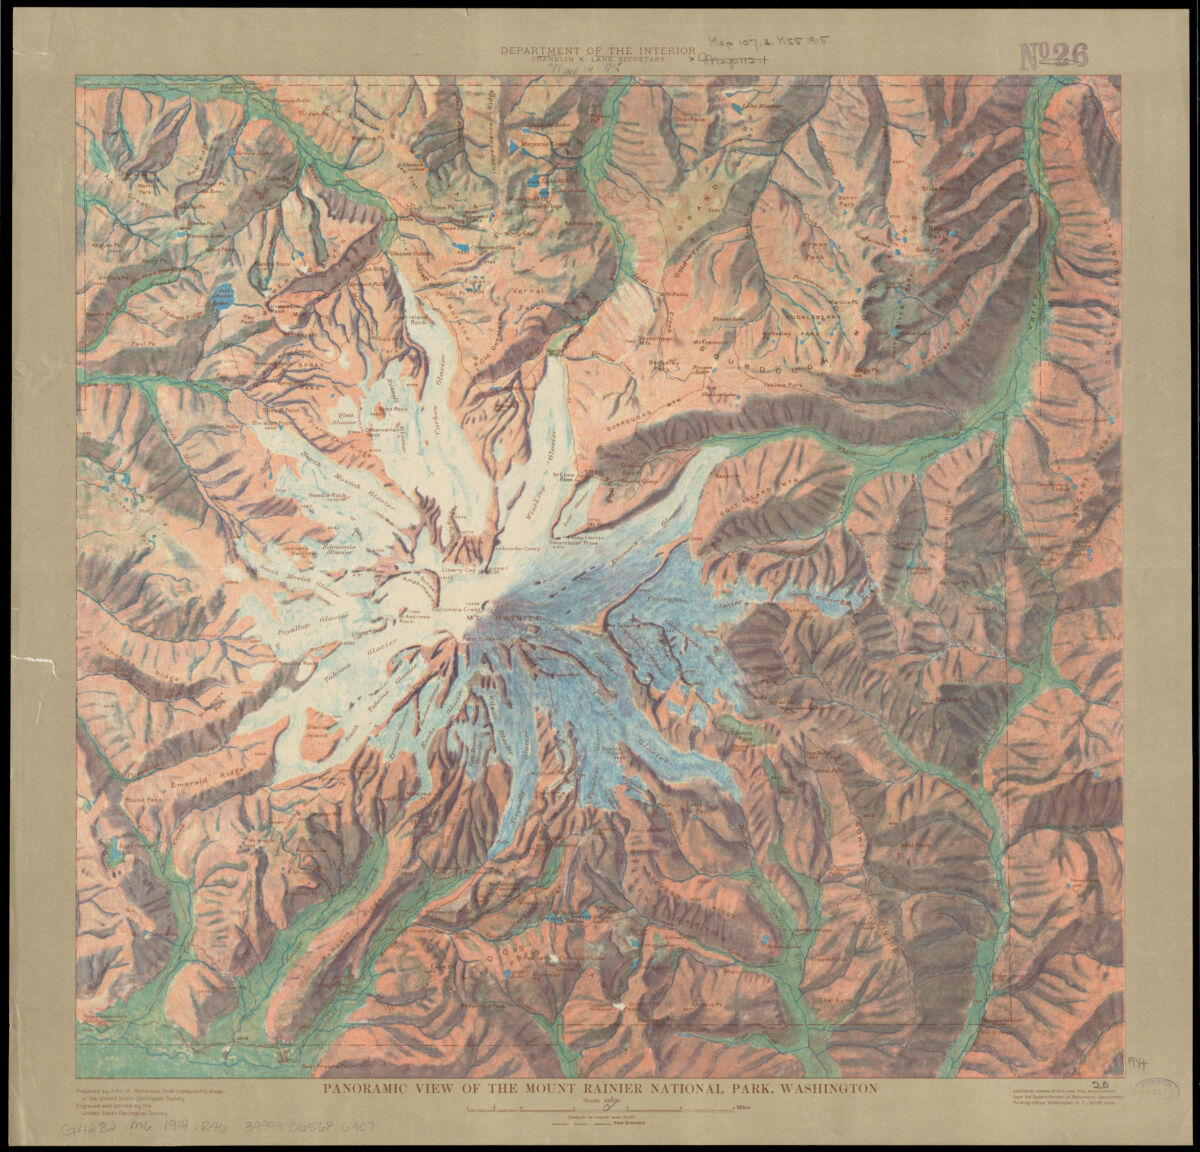 An early 20th-century topographic map of Mount Rainier National Park.